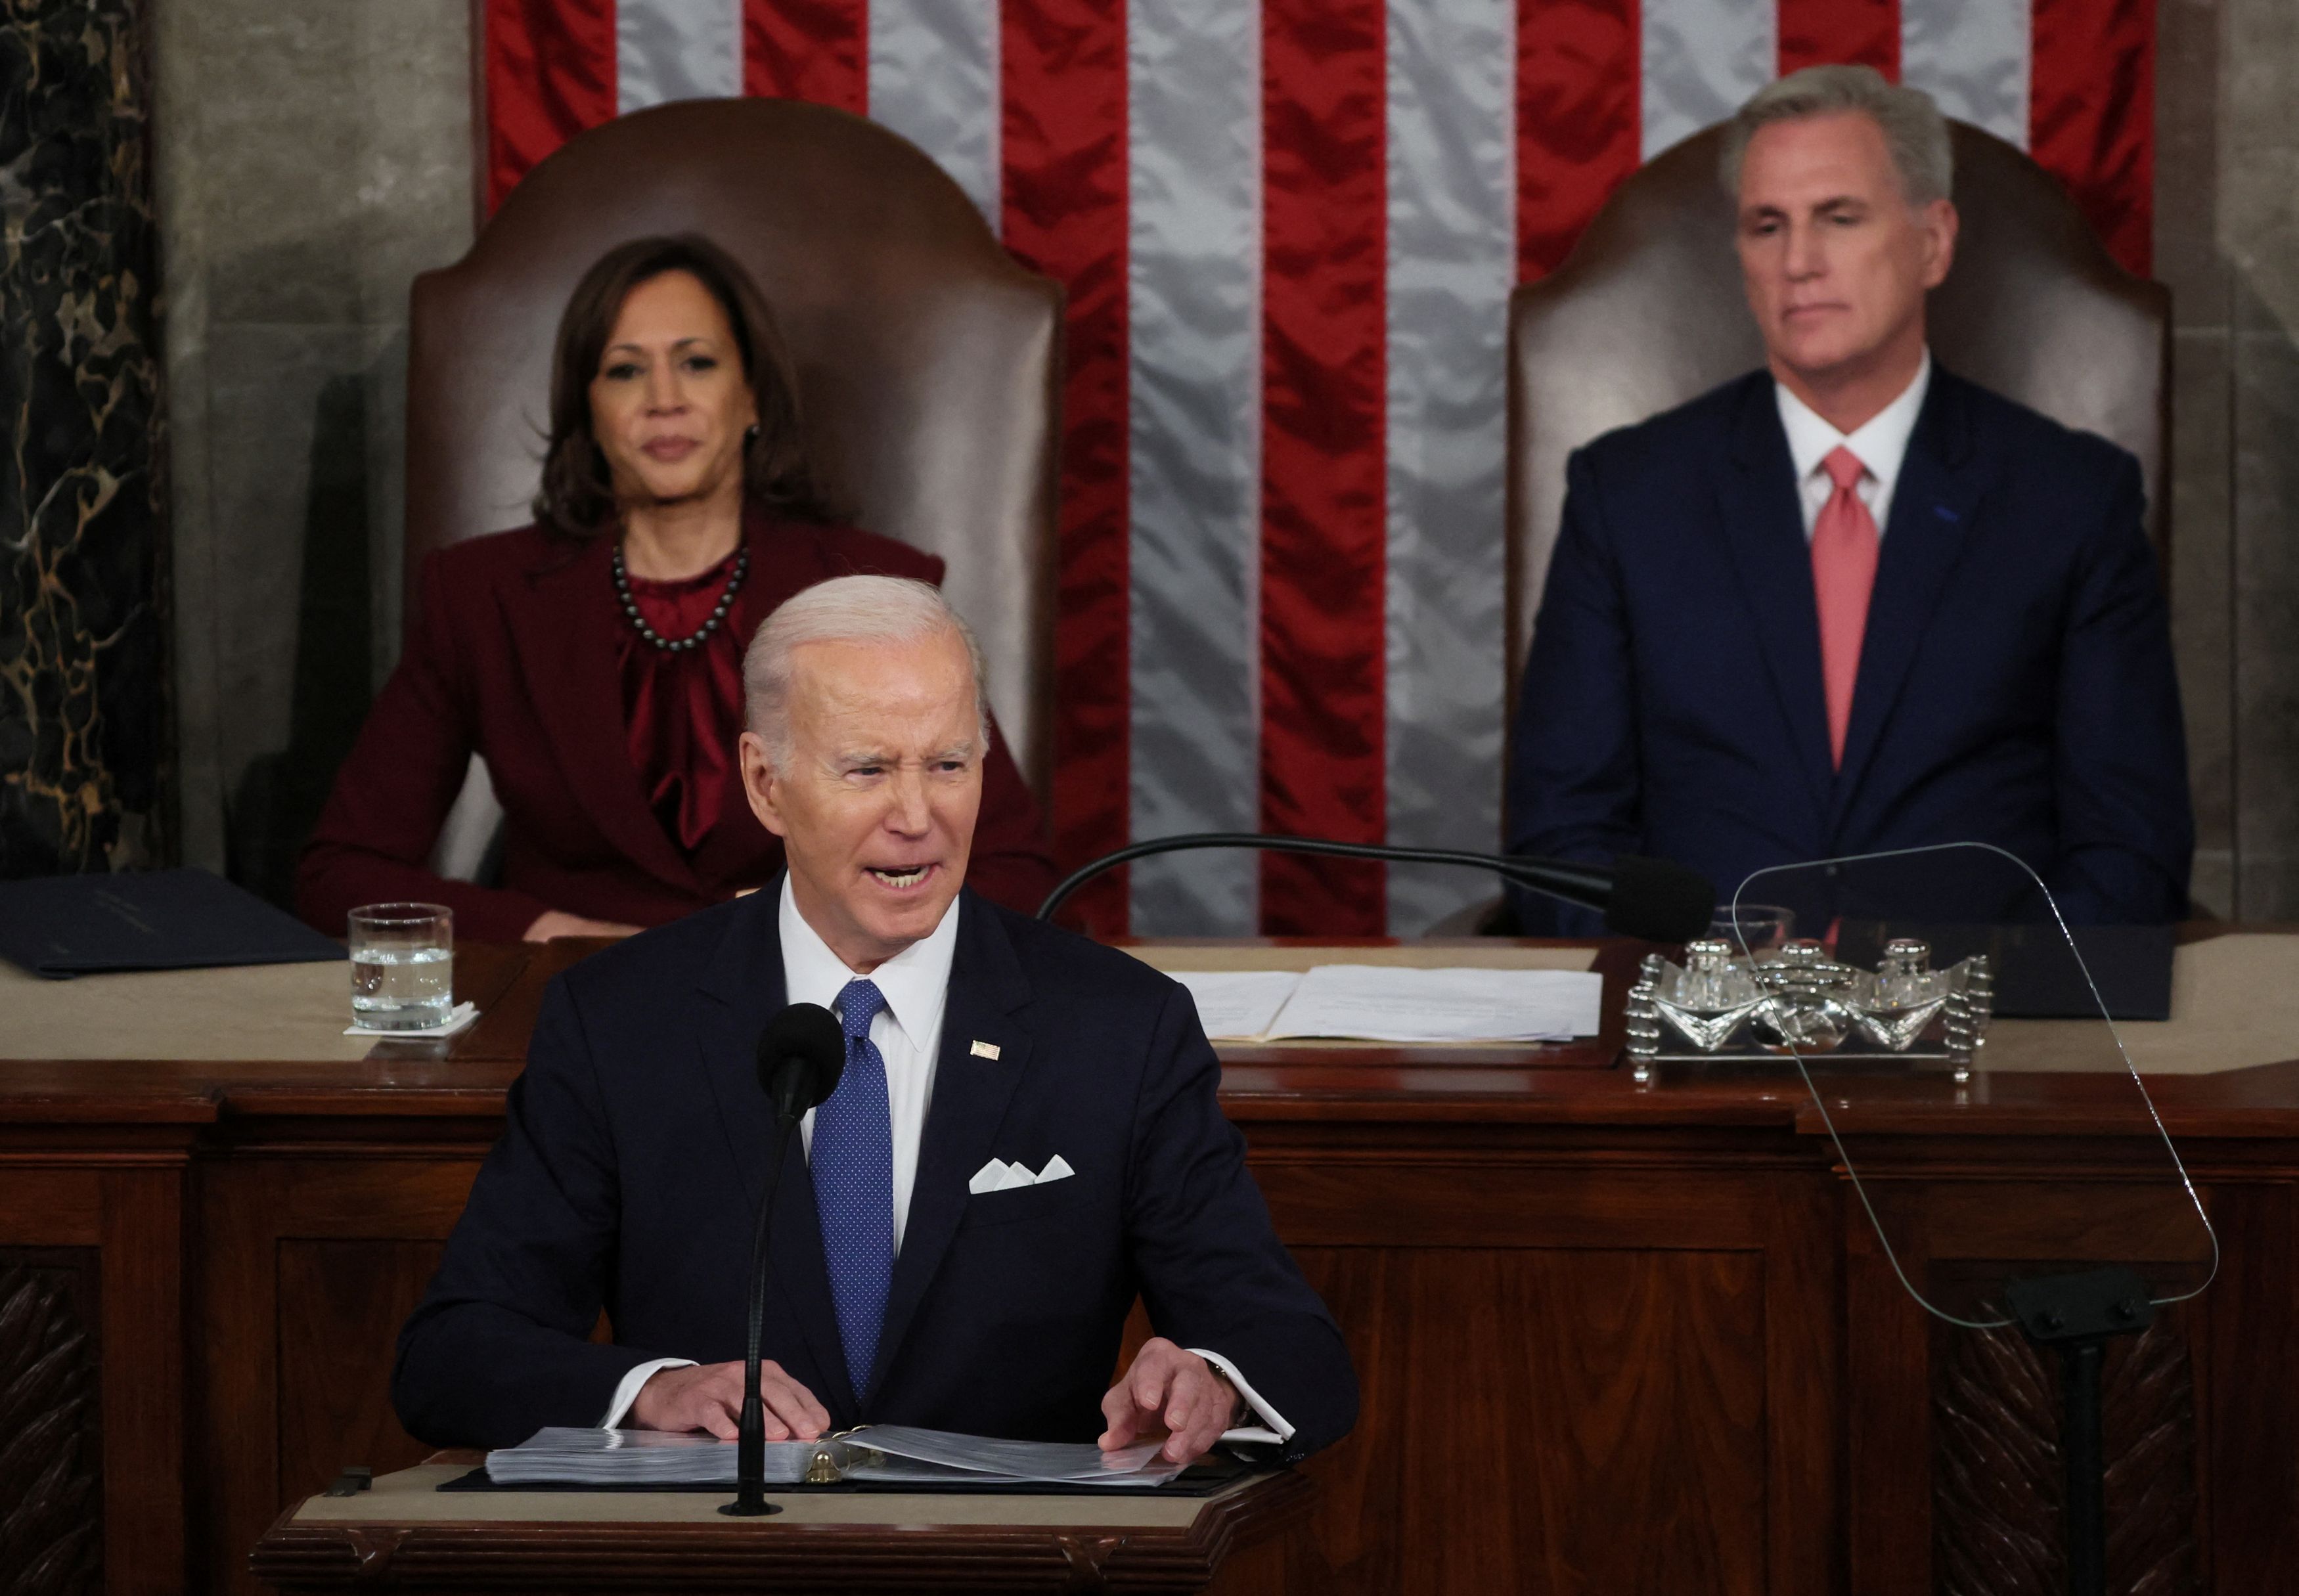 U.S. President Joe Biden delivers his State of the Union address in the House Chamber at the U.S. Capitol in Washington, U.S., February 7, 2023. /Reuters